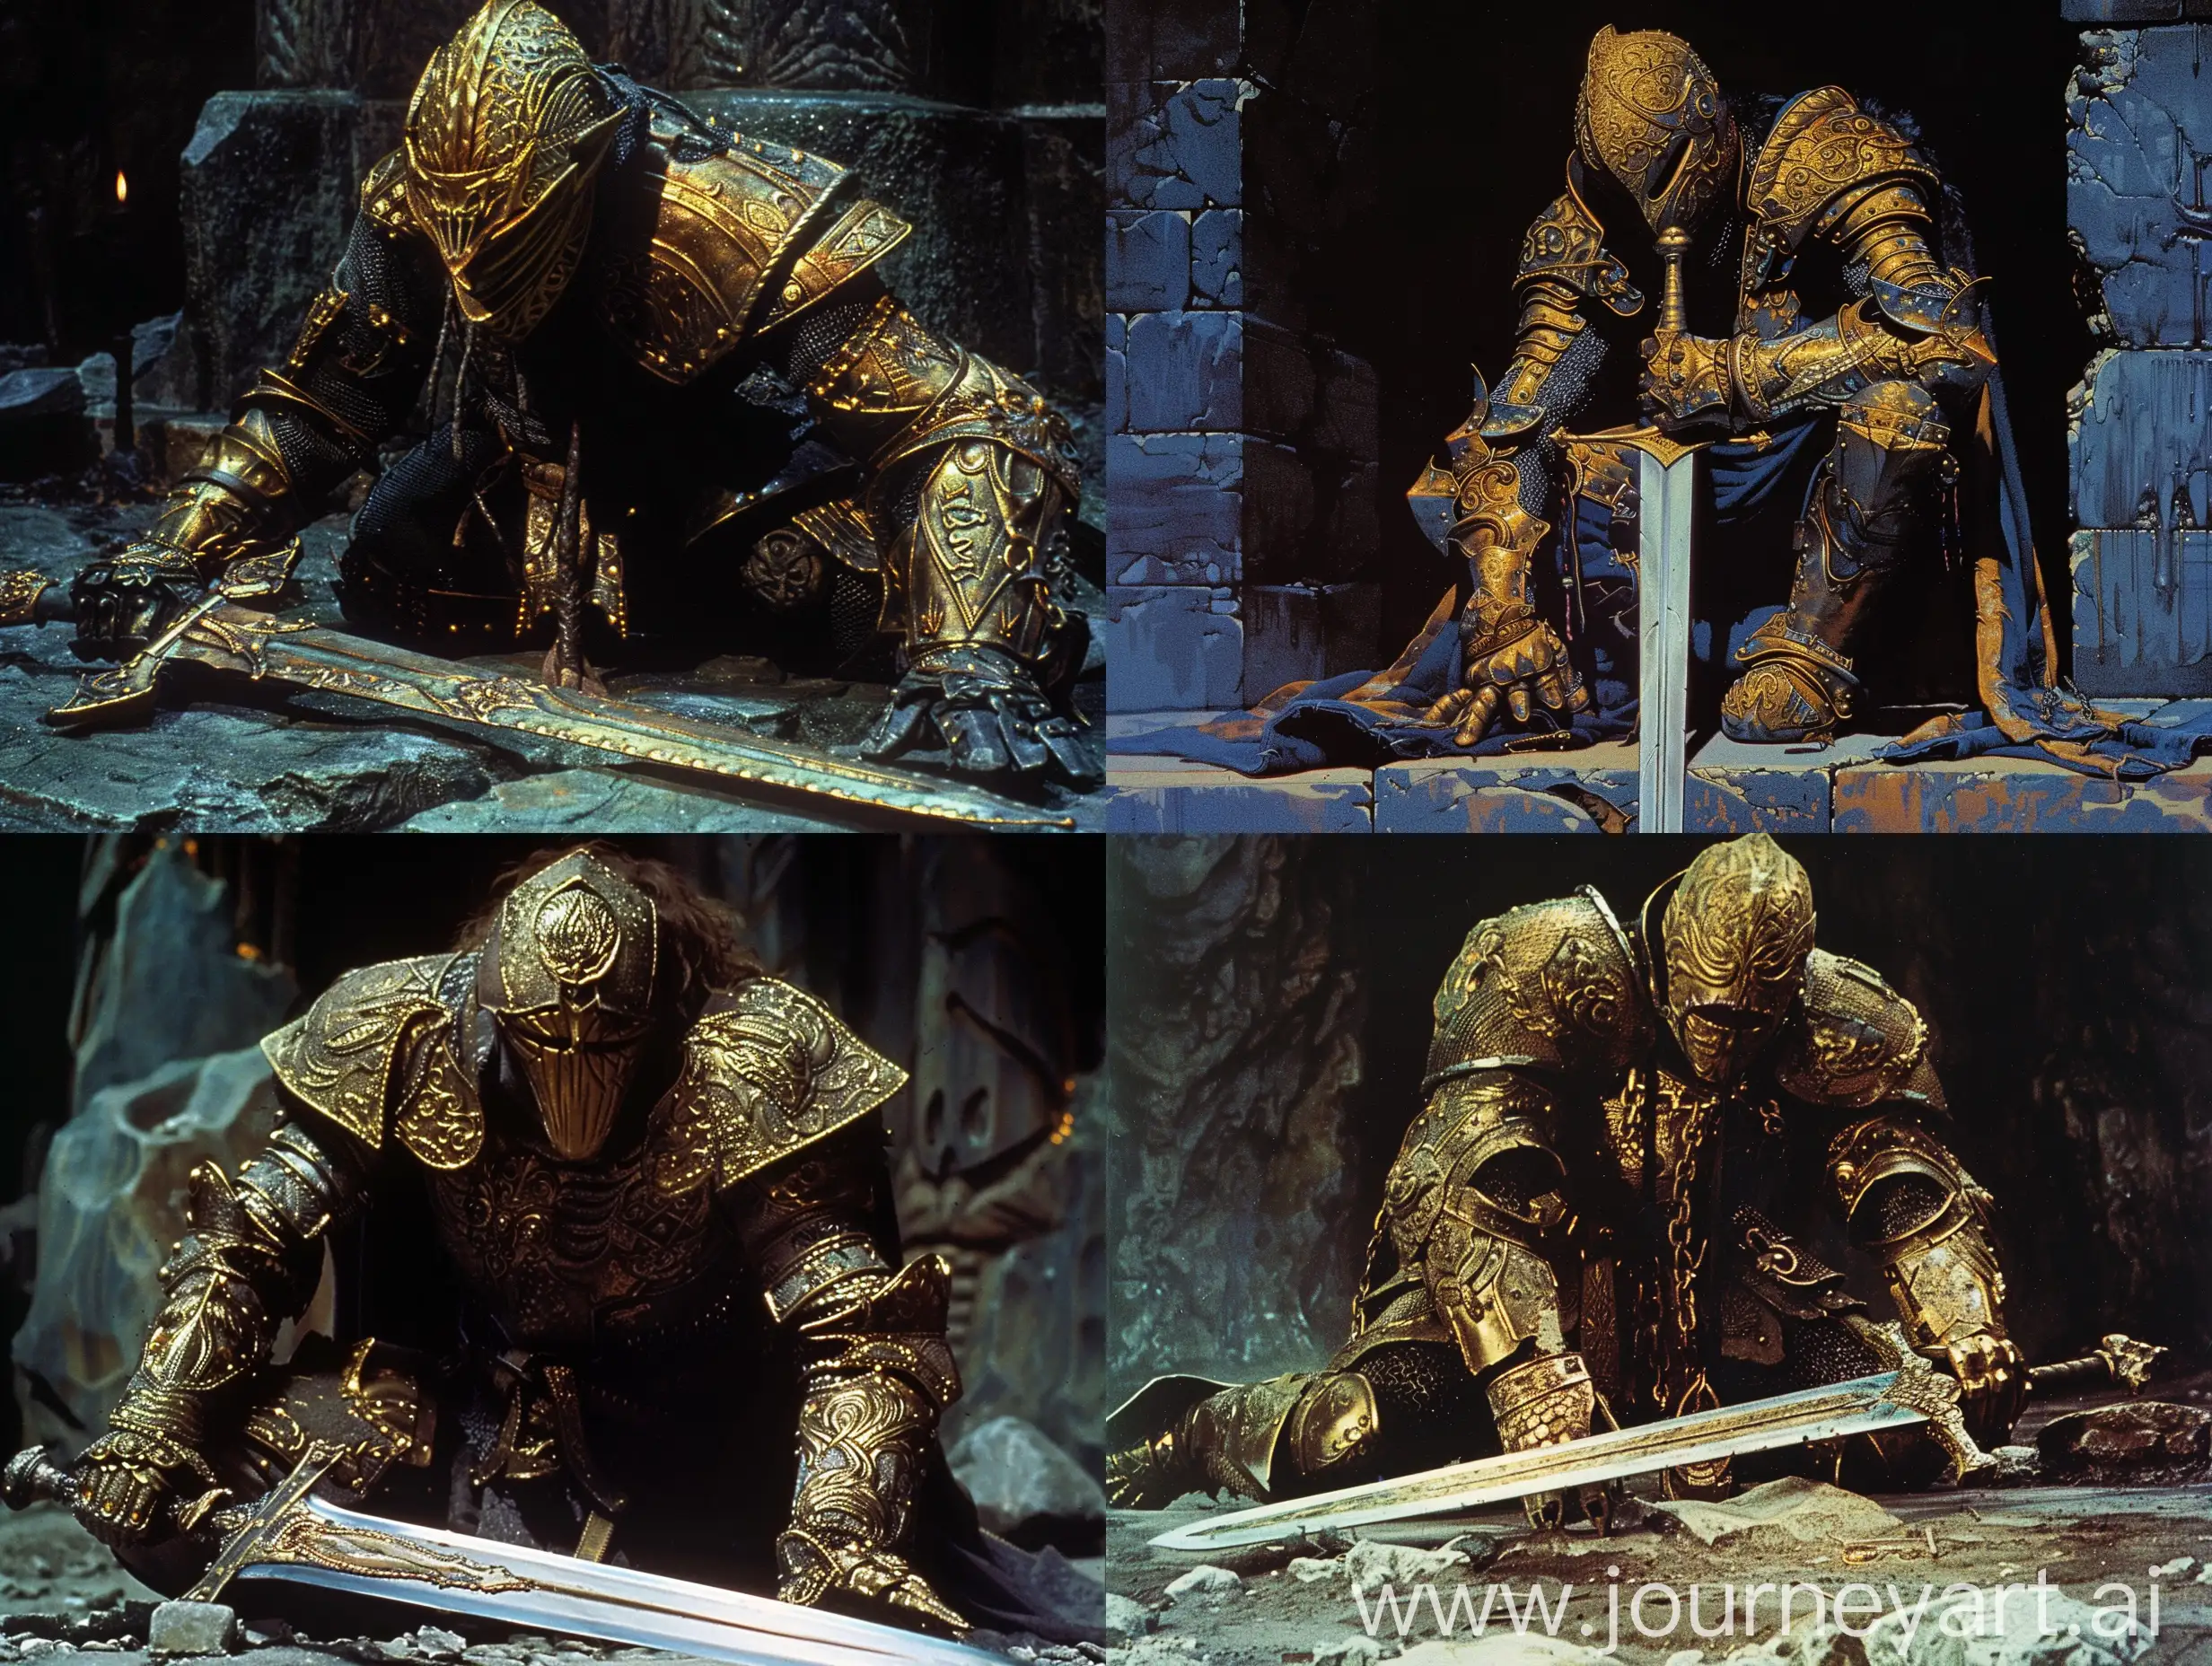 Screenshot from the 1986 Labyrinth DVD, scene of a strong knight, with his sword on the ground. His armor had golden details, he wore a golden mask that covered his entire face. 1980's illustration dark fantasy.